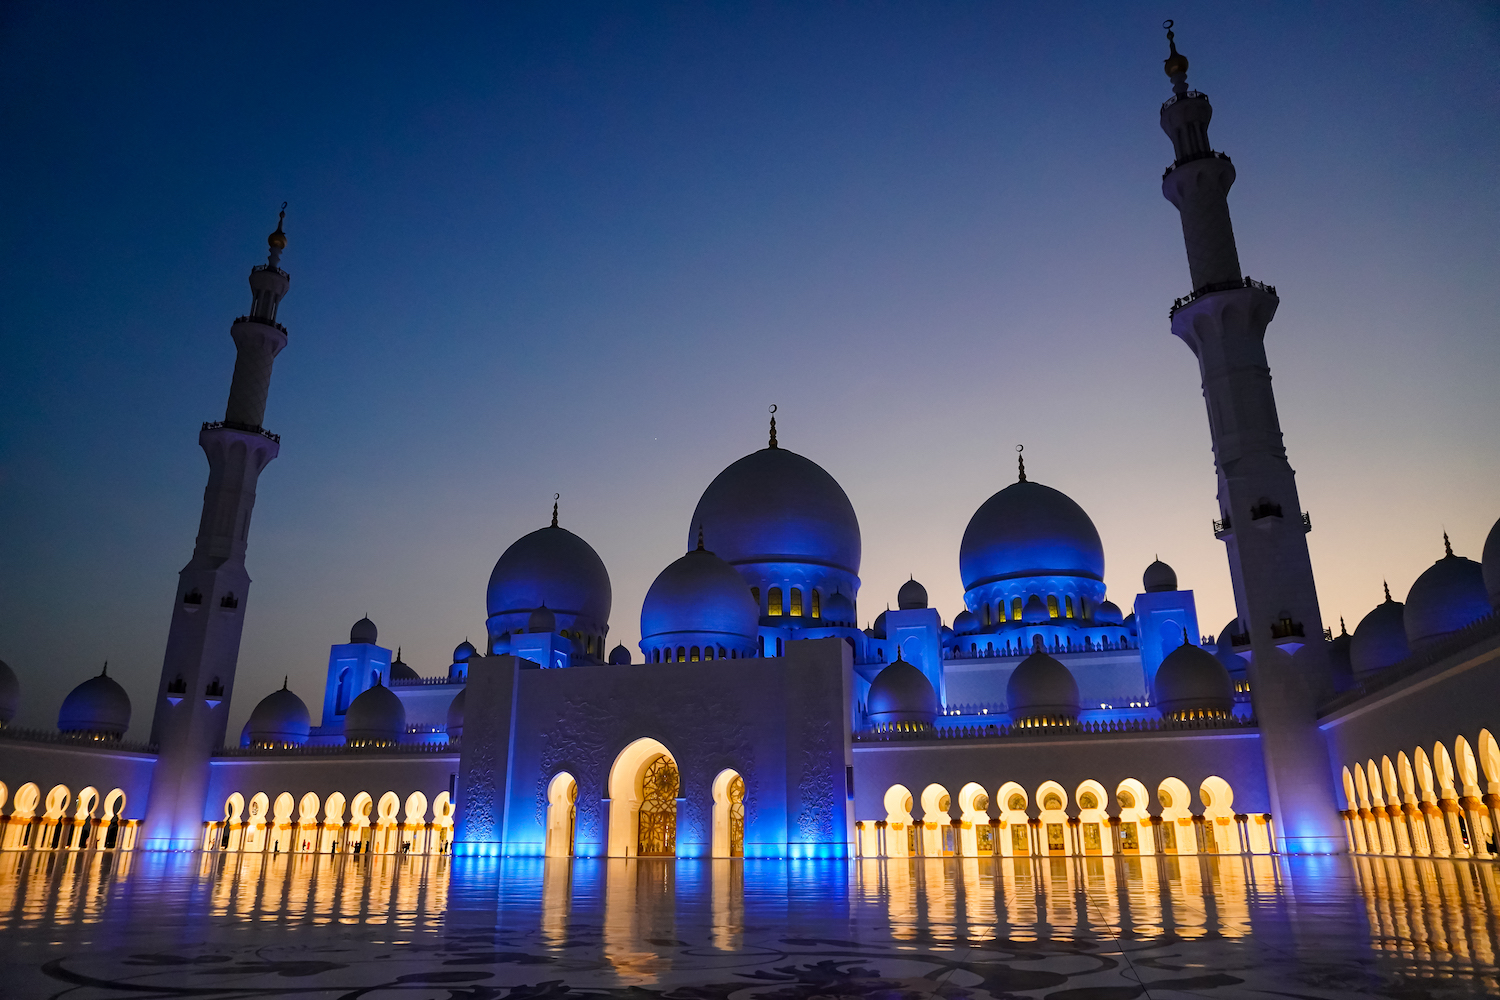 The Sheikh Zayed Grand Mosque lit up blue at night.